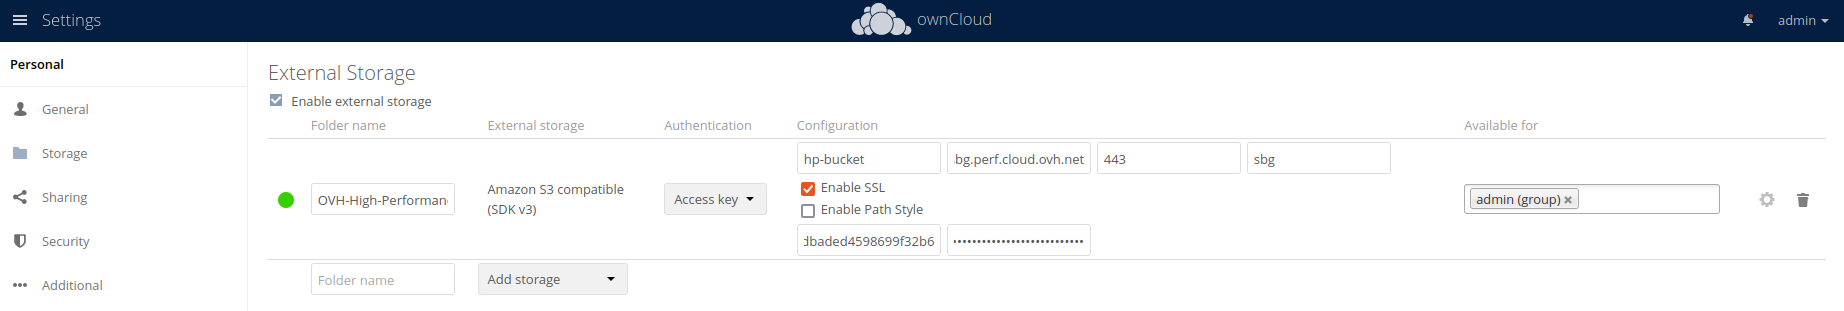 Owncloud complete AWS S3 storage